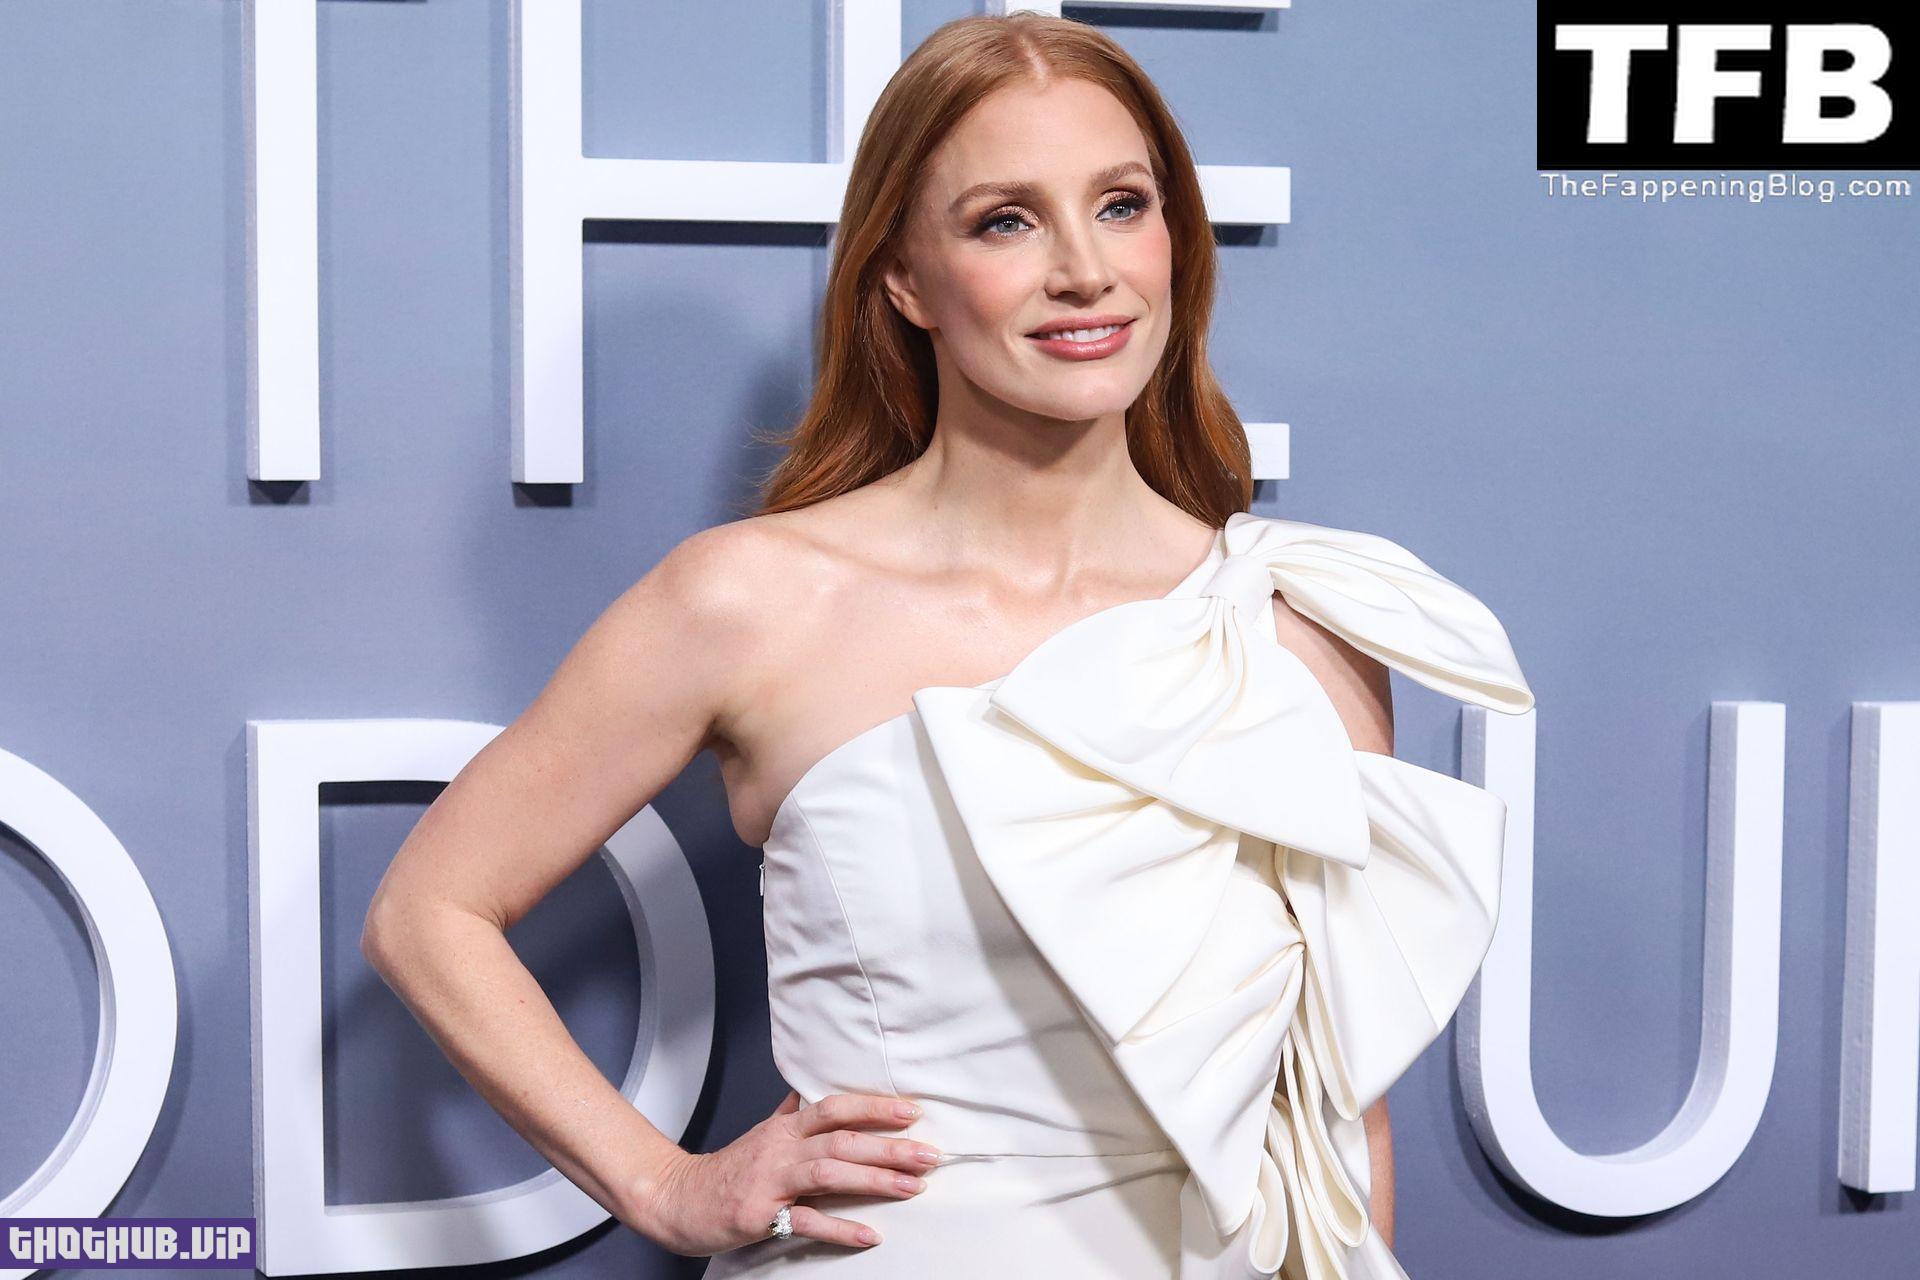 Jessica Chastain Sexy The Fappening Blog 149 1